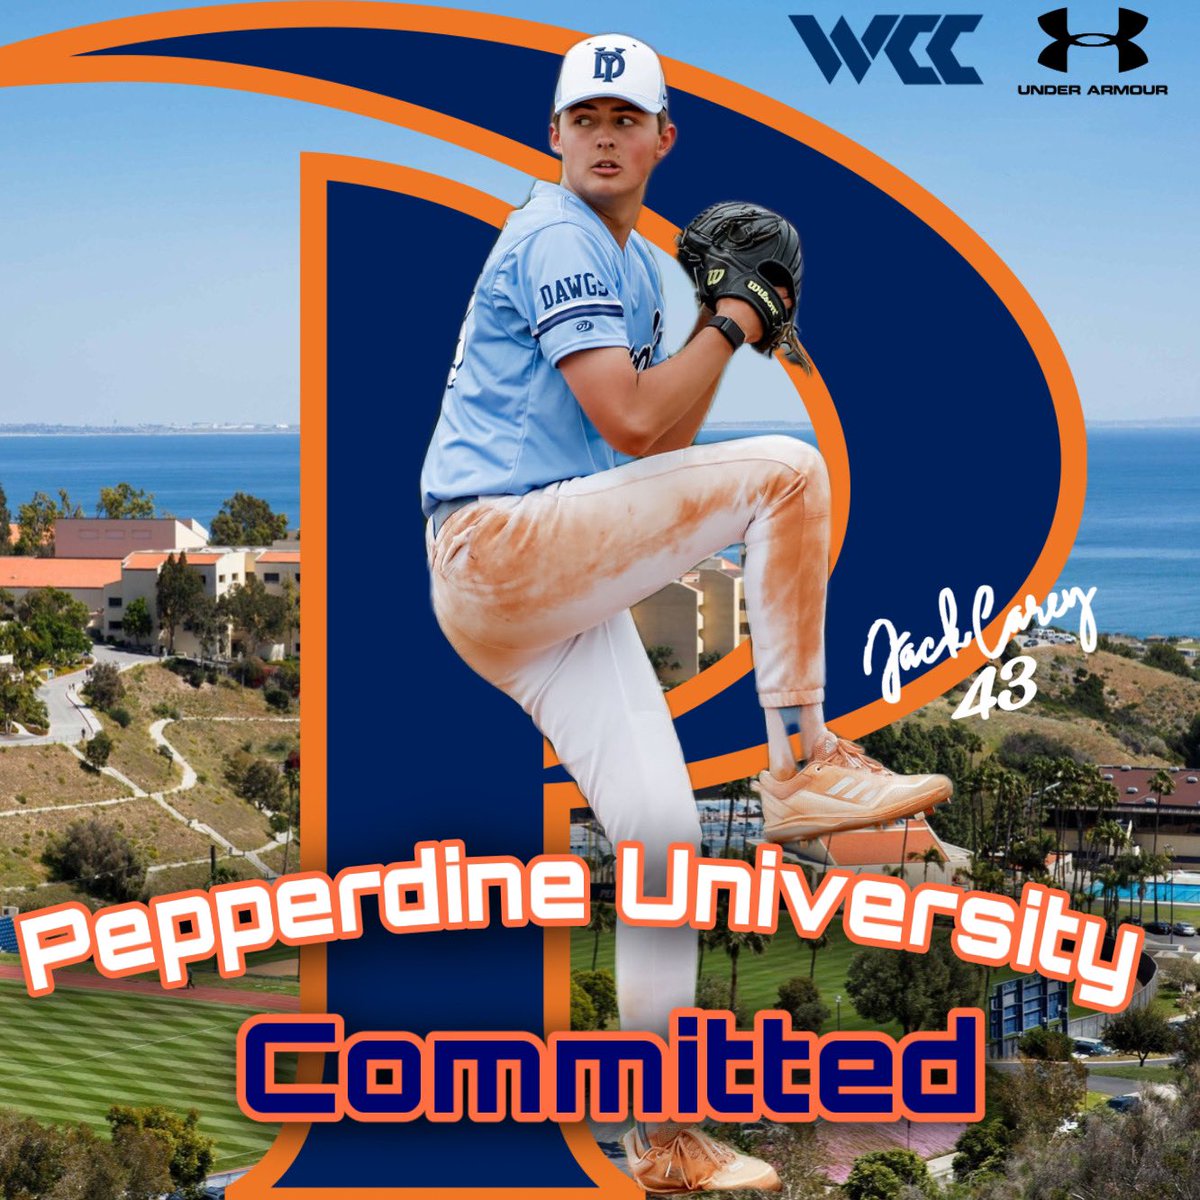 I am extremely humbled and excited to announce my commitment to play Division 1 baseball at Pepperdine University! I'd like to give a huge thanks to all my family, coaches, and teammates that have helped me get this far! Can't wait to see what God has in store for the future.🌊🌊